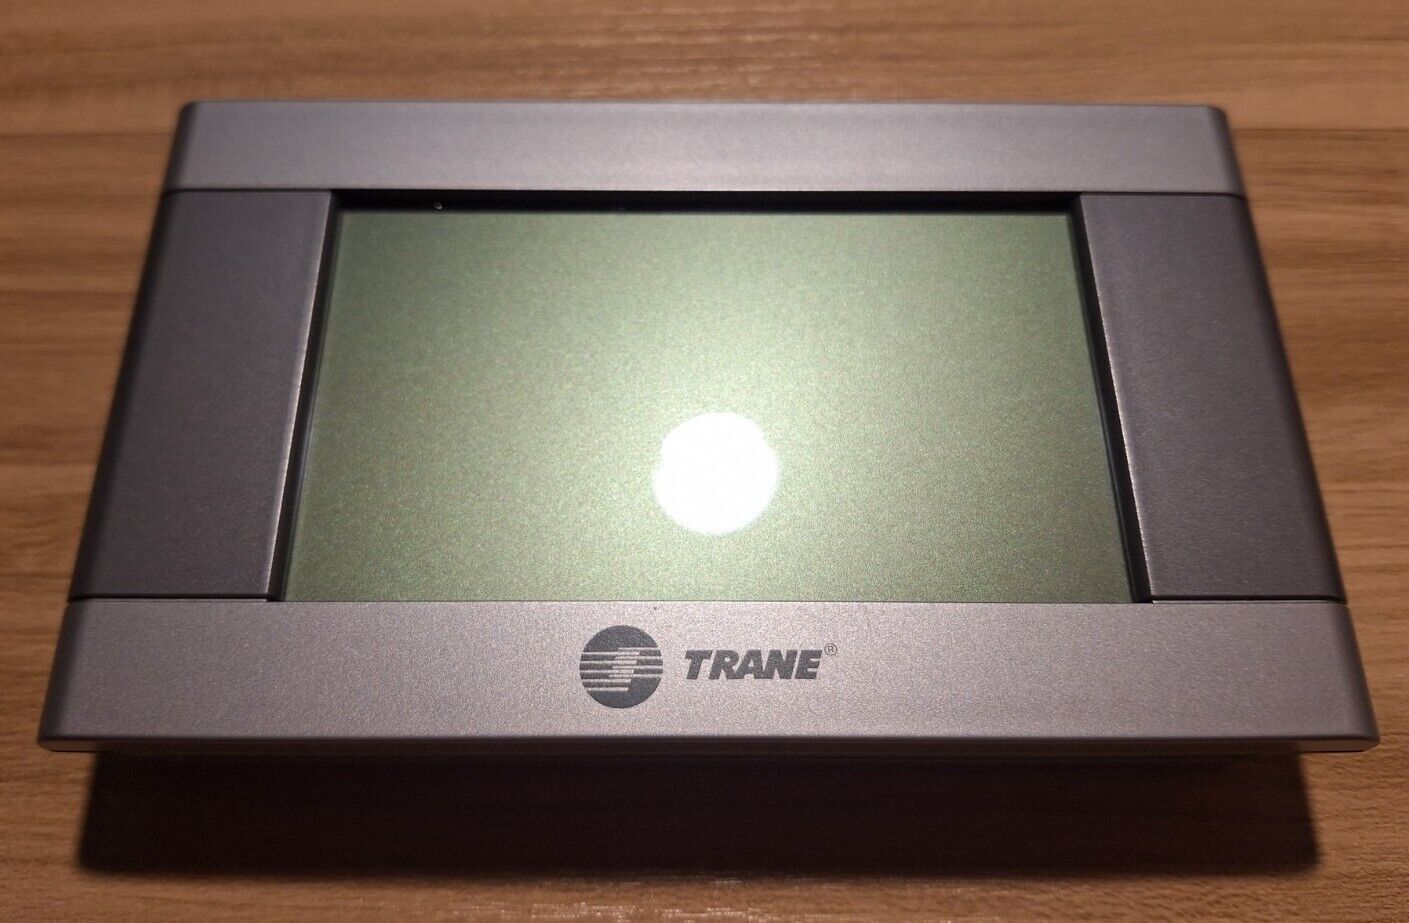 Trane TCONT624AS42DAA Digital Touchscreen Thermostat w/ Mounting Base Plate 